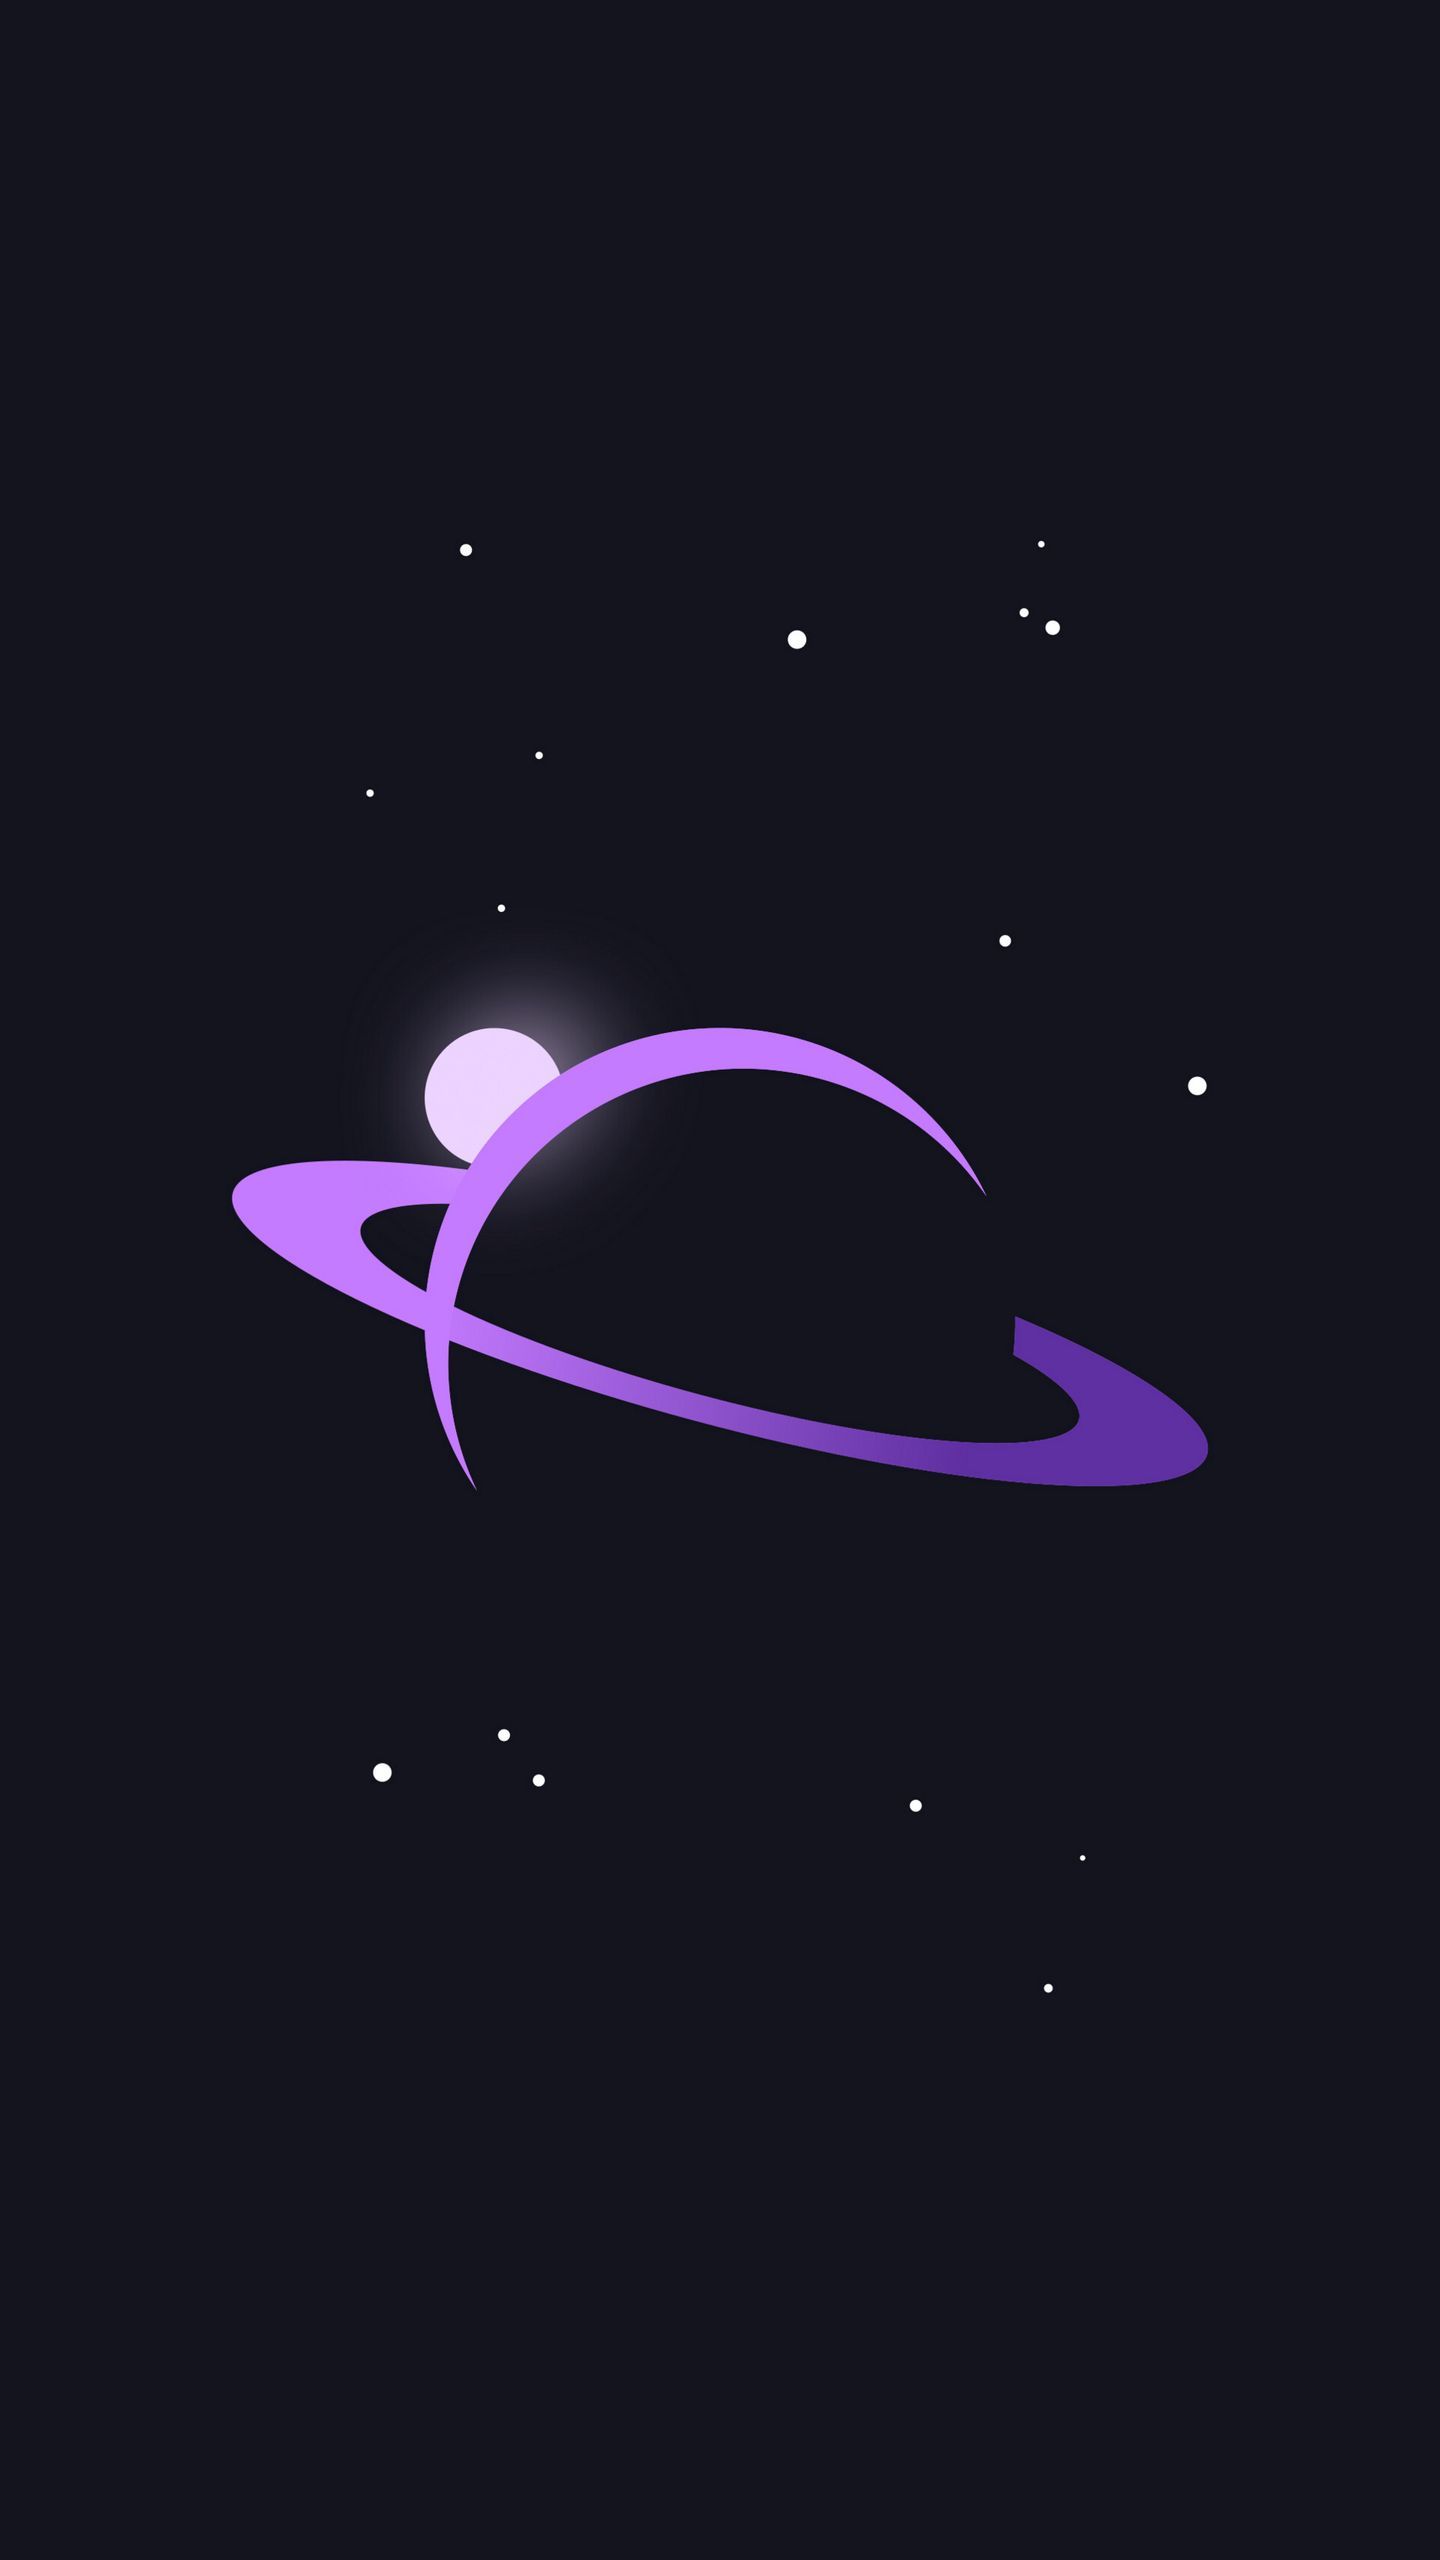 An image of a purple planet on a black background - Planet